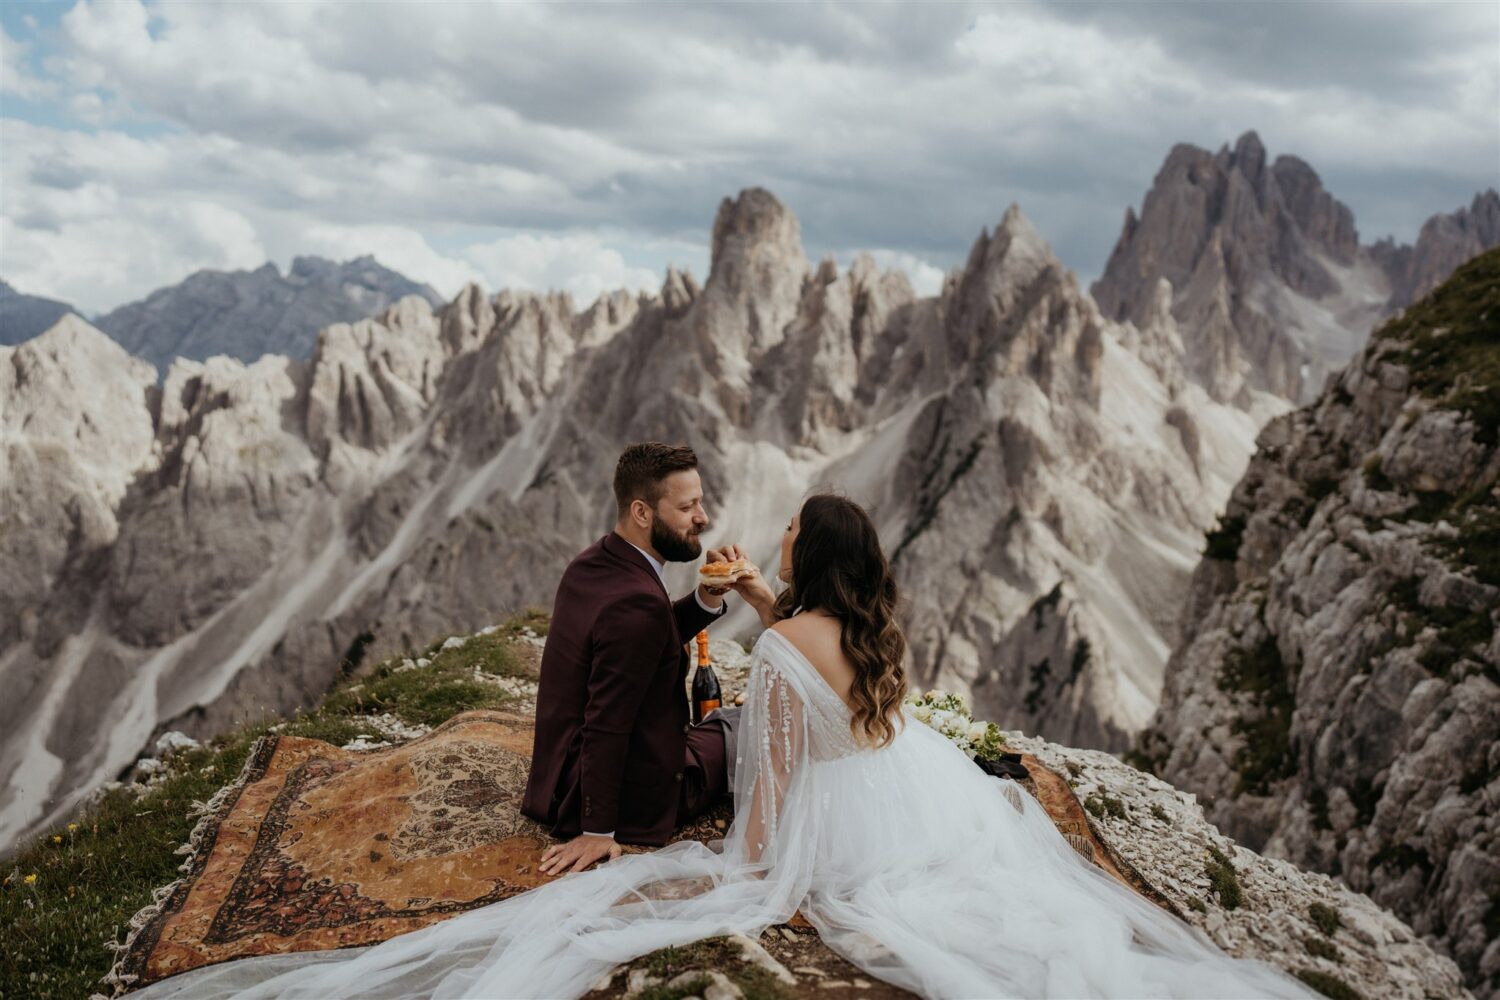 couple eats sandwich at mountaintop picnic on the Italian Dolomites